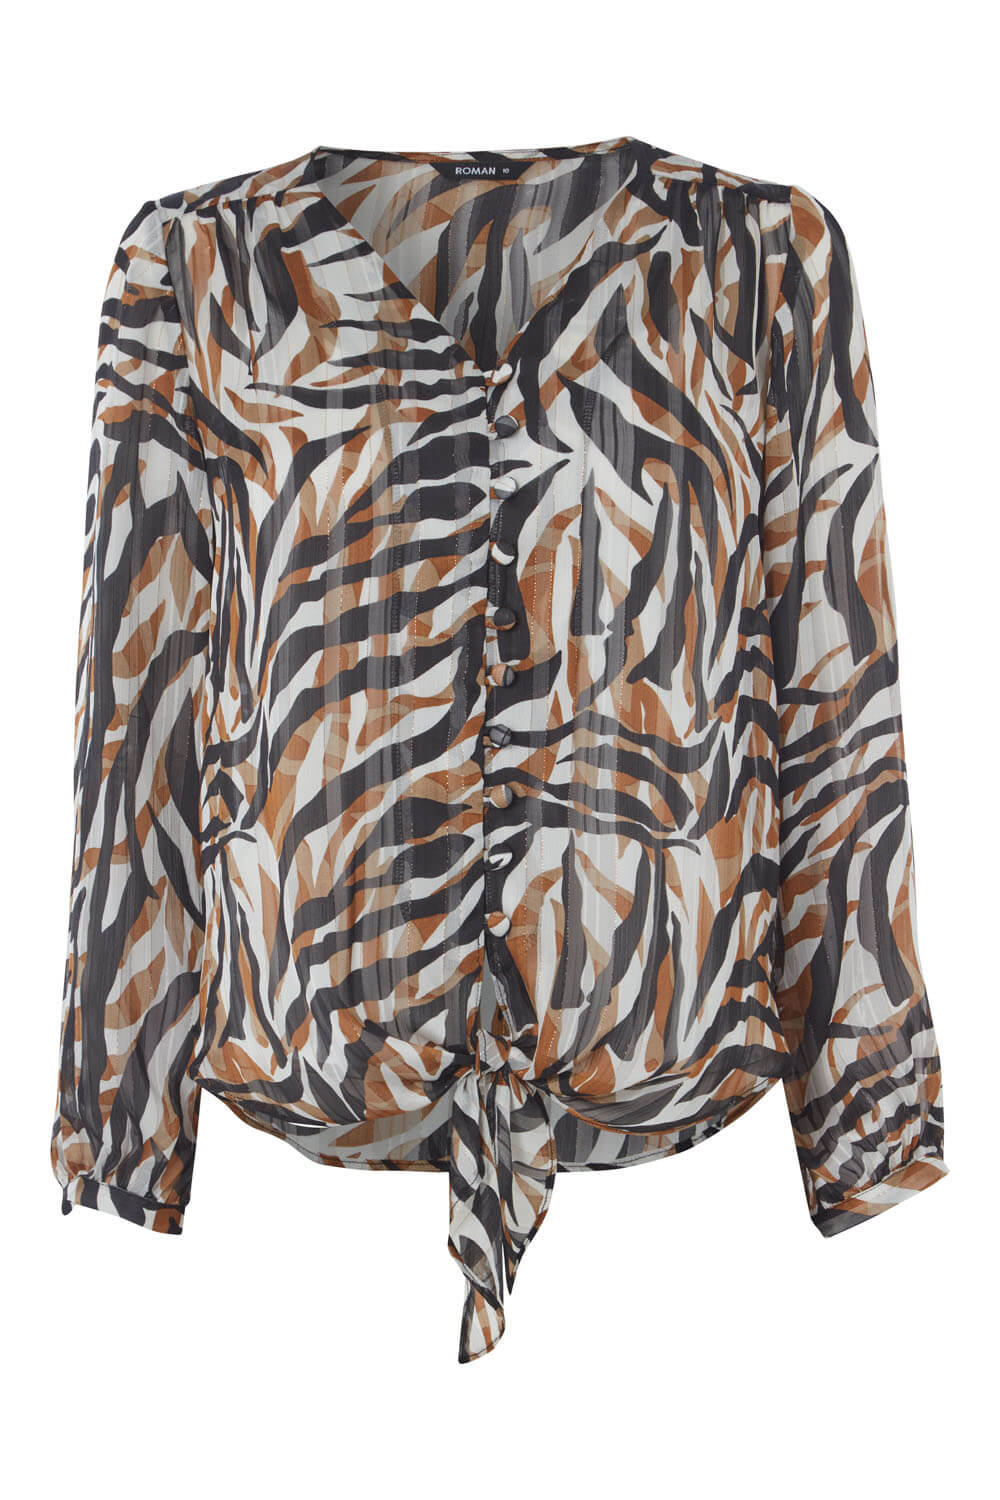 Brown Animal Print Tie Front Blouse, Image 4 of 4